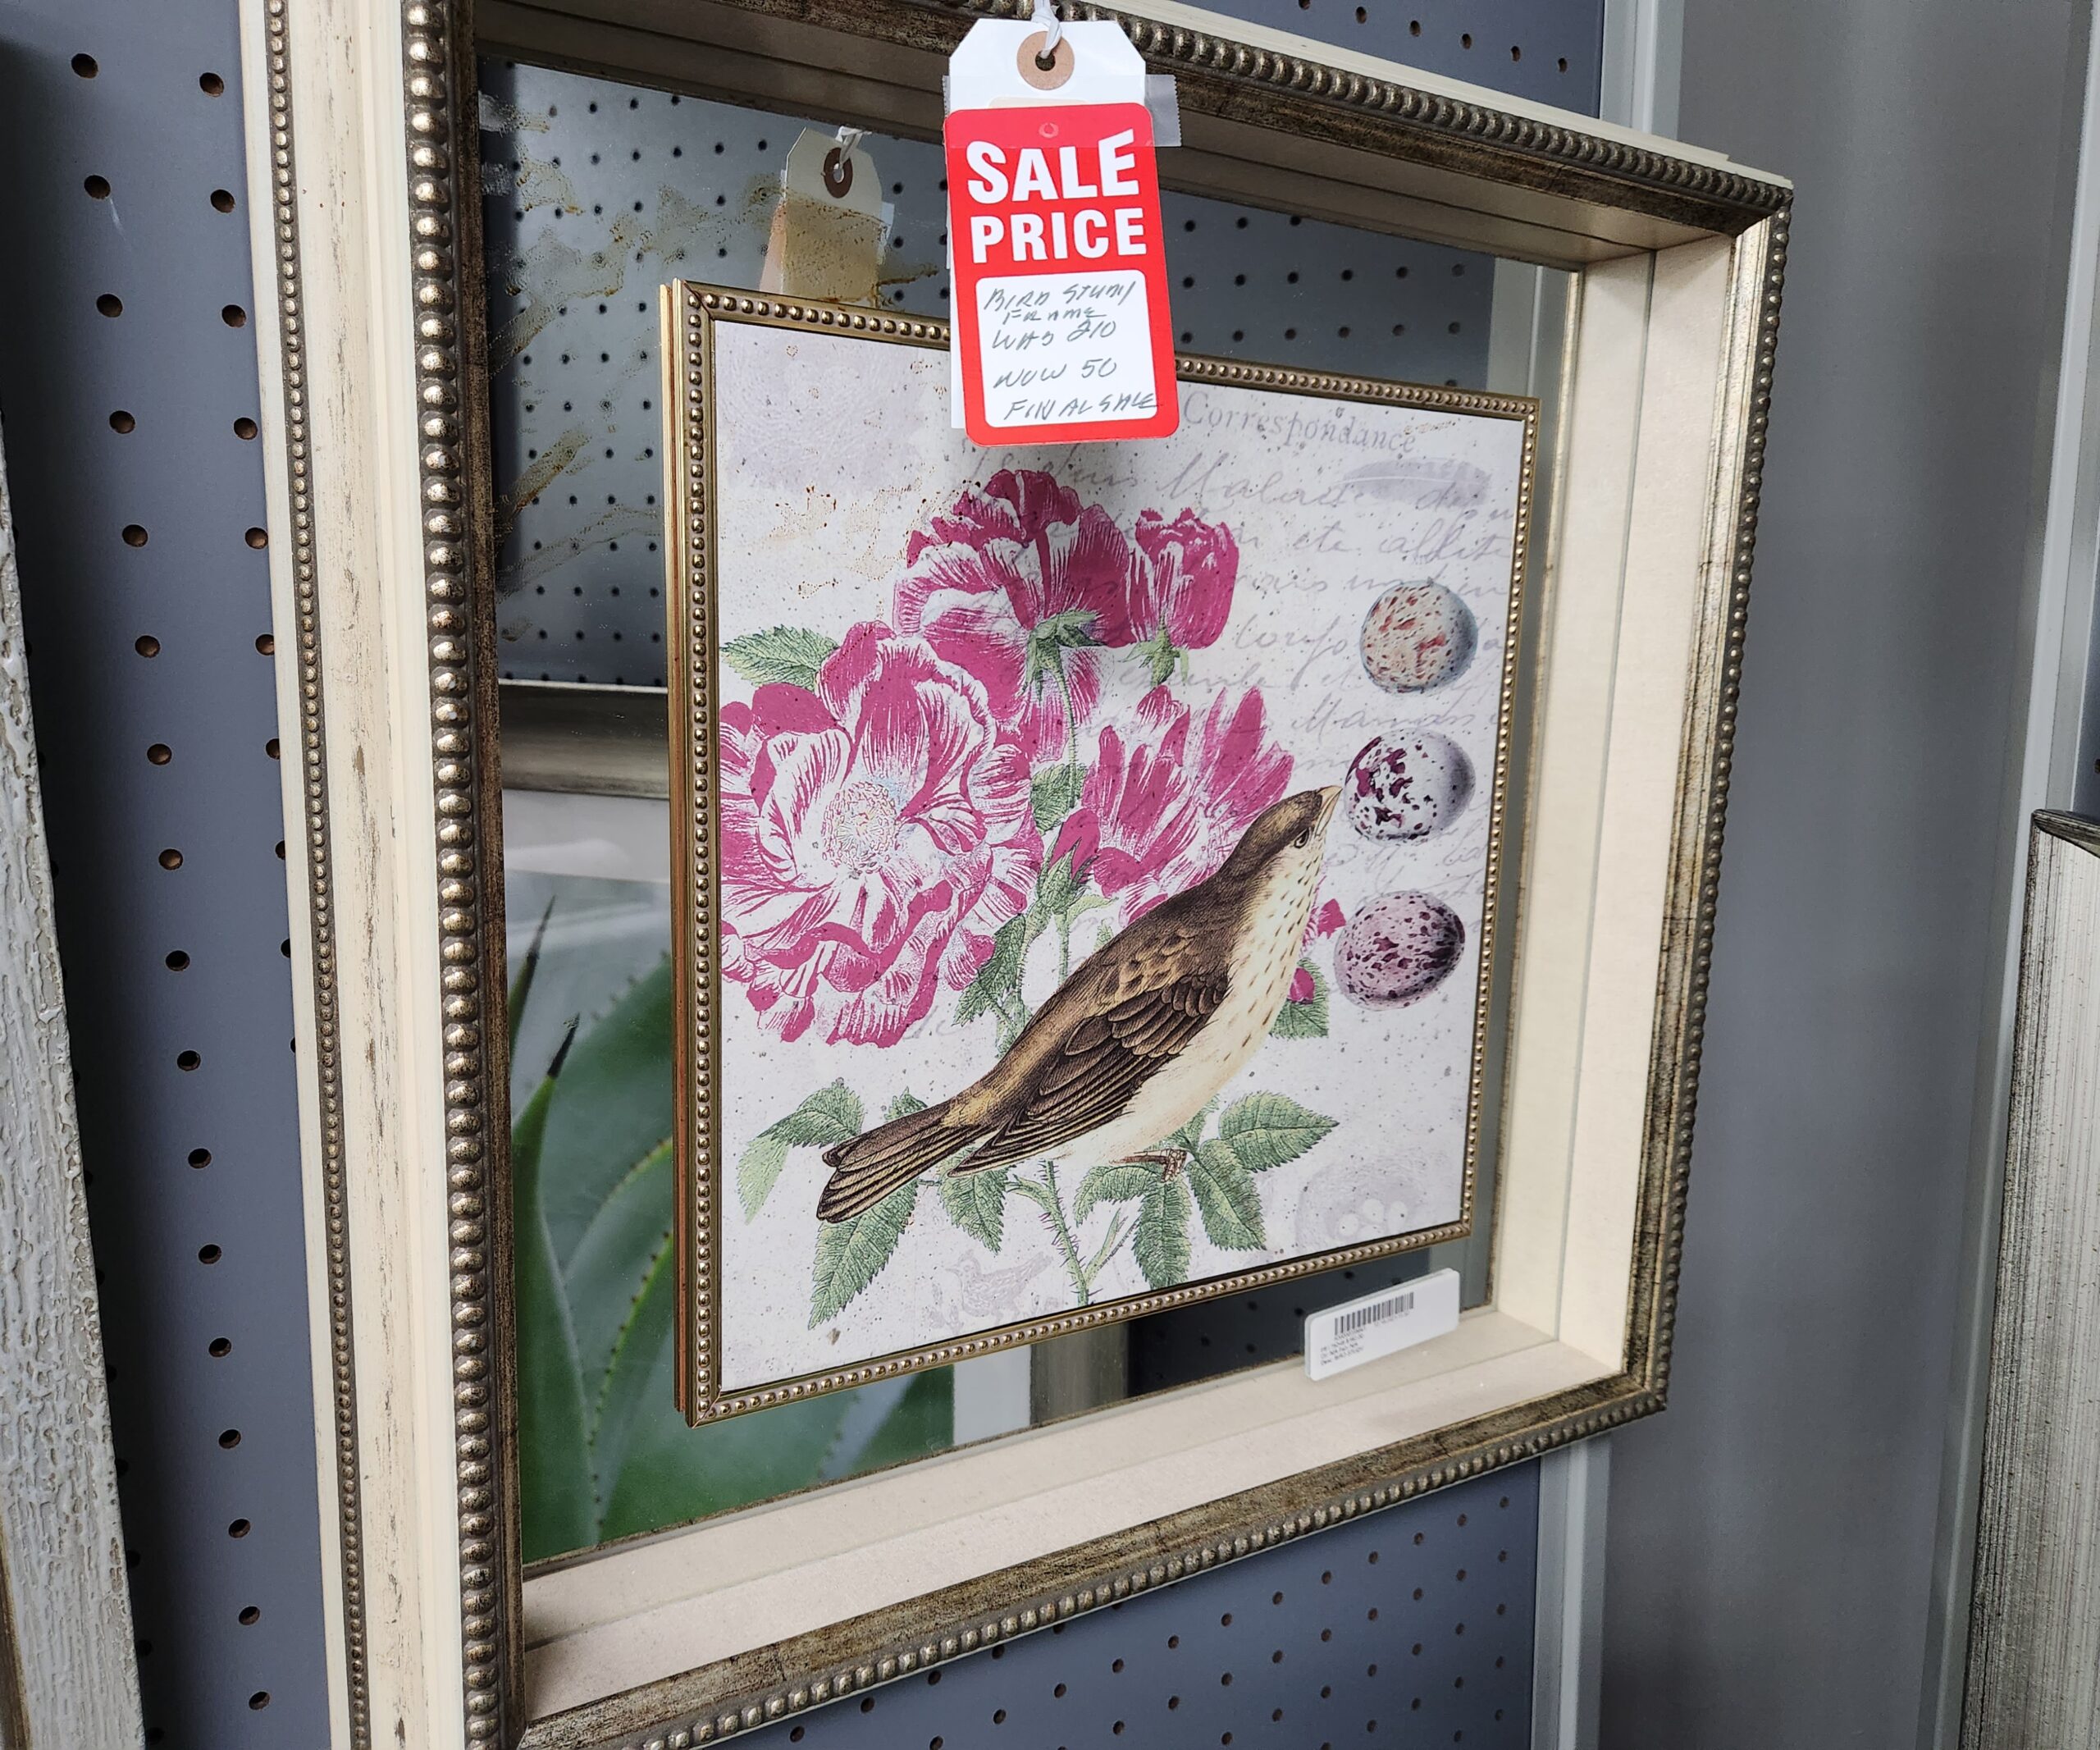 a bird is sitting on a flower in a frame